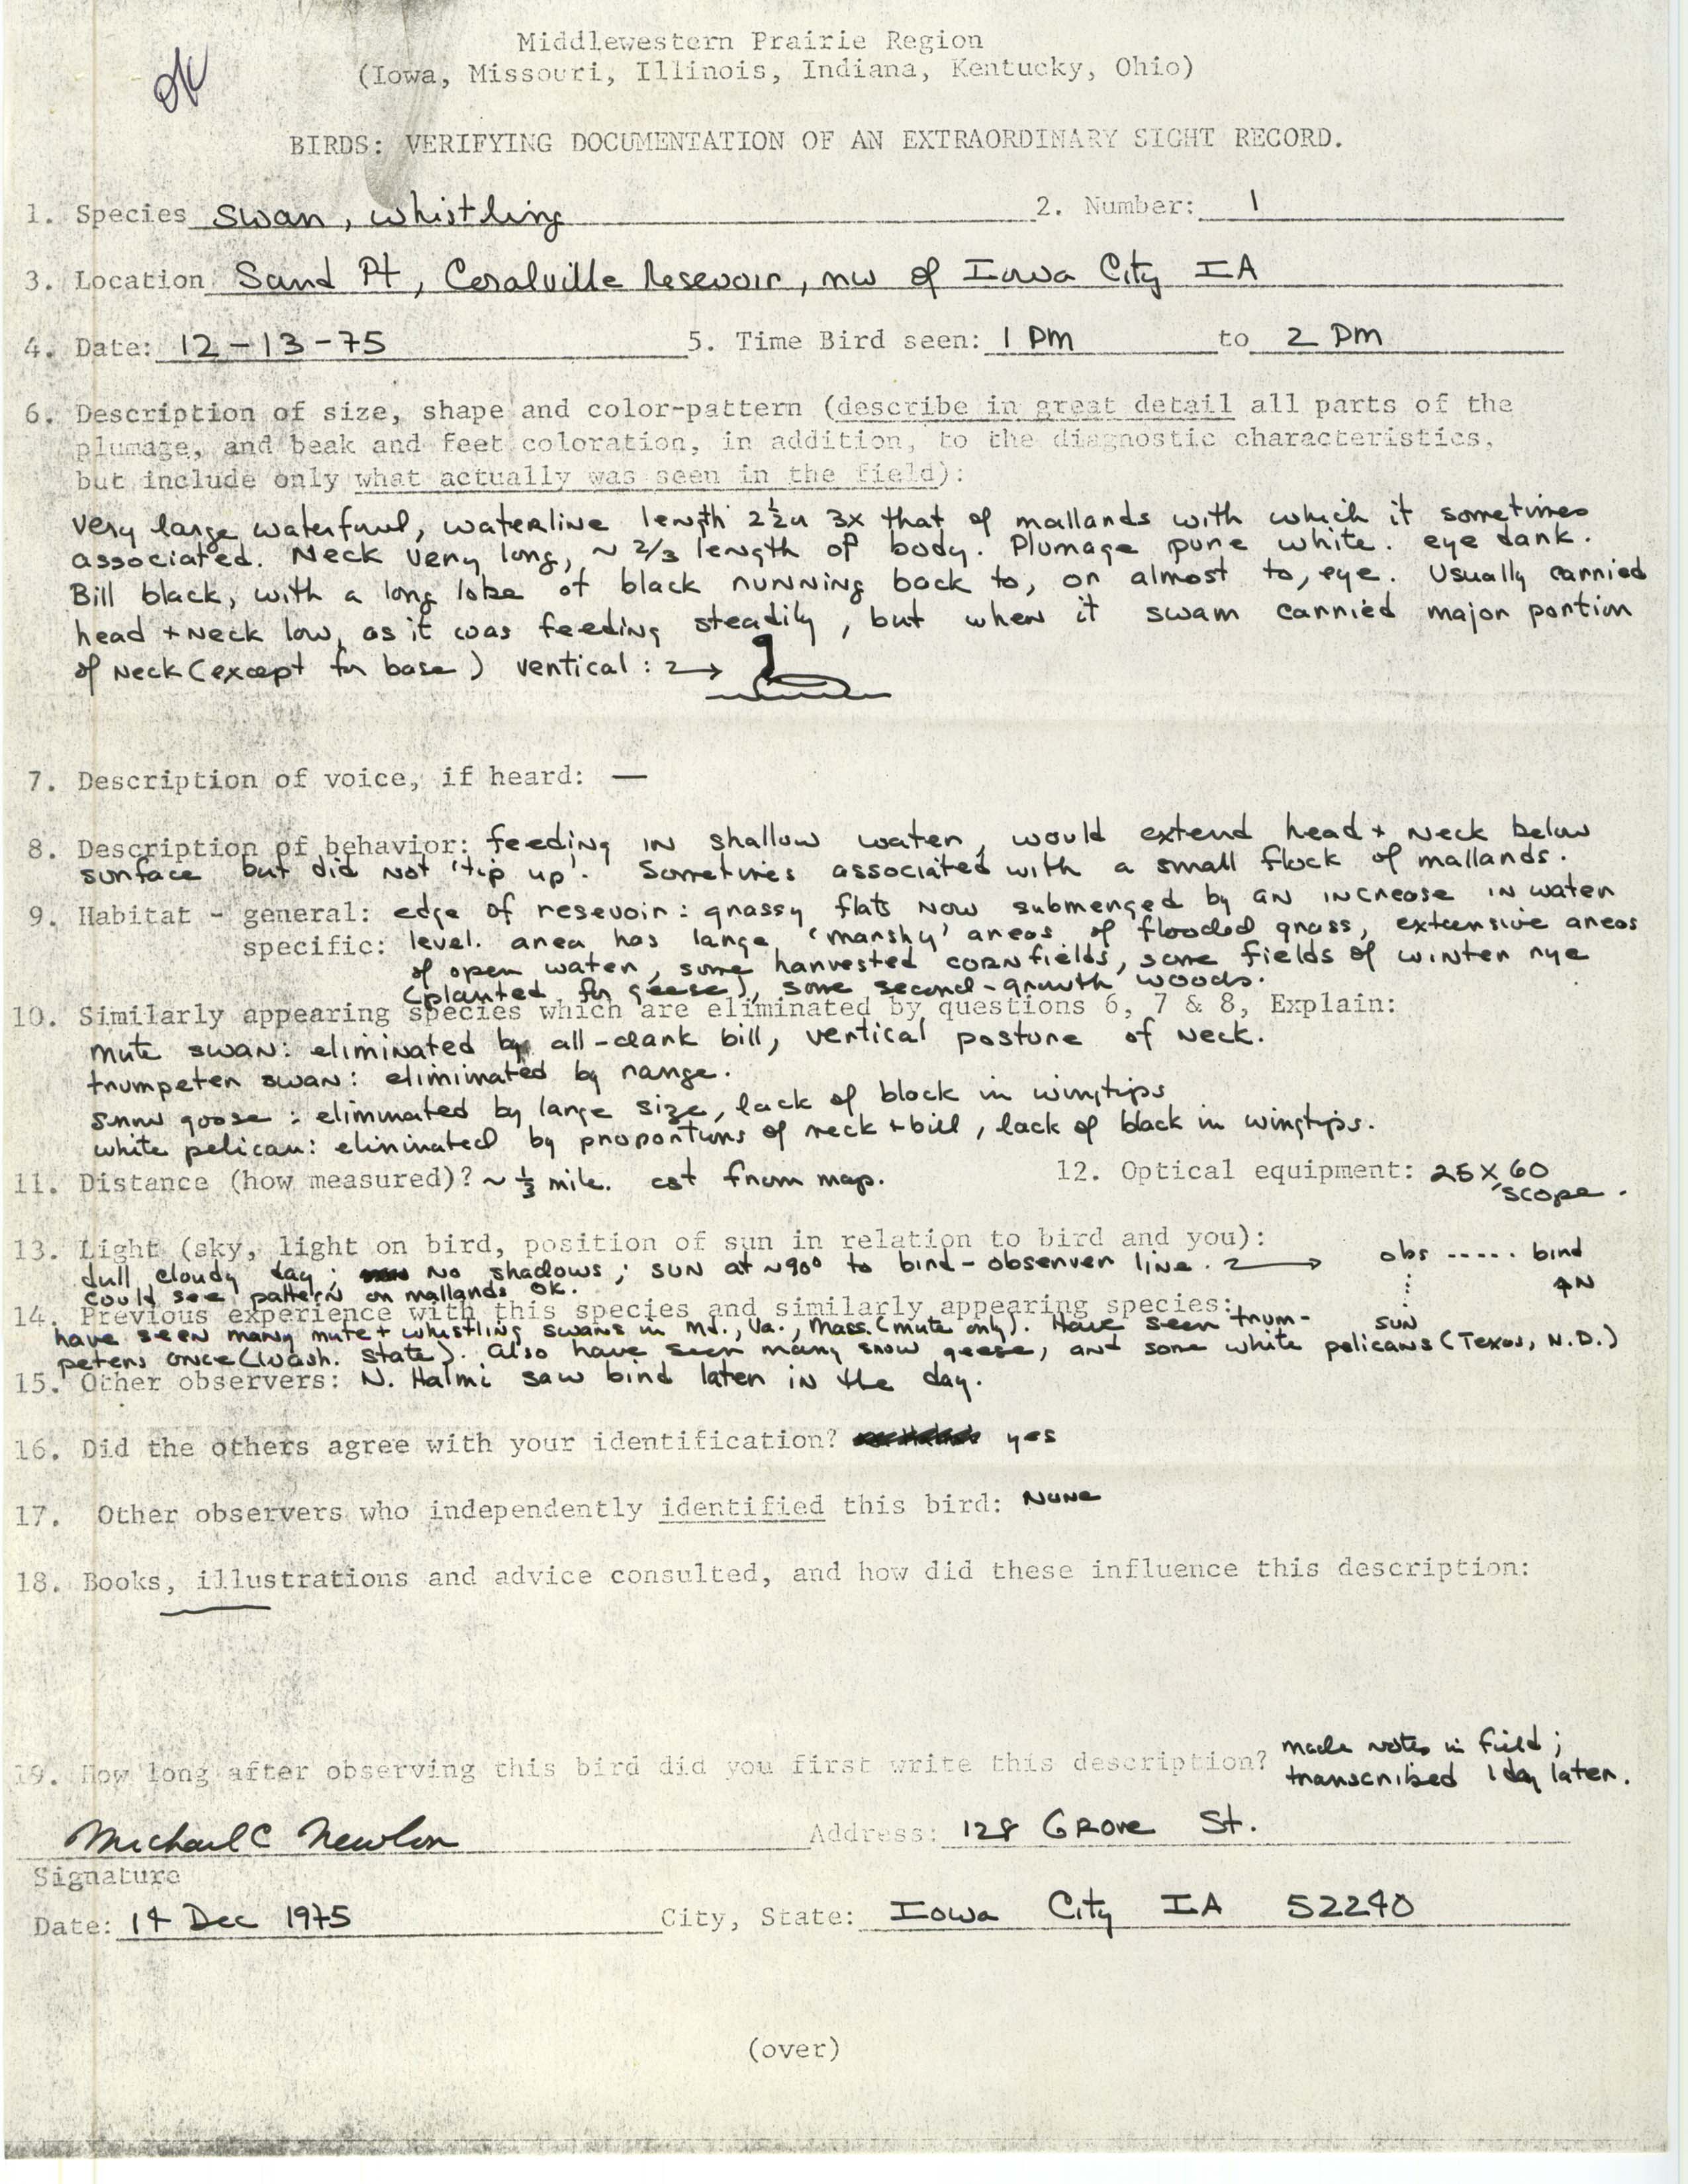 Rare bird documentation form for Tundra Swan at Sand Point at Coralville Reservoir, 1975